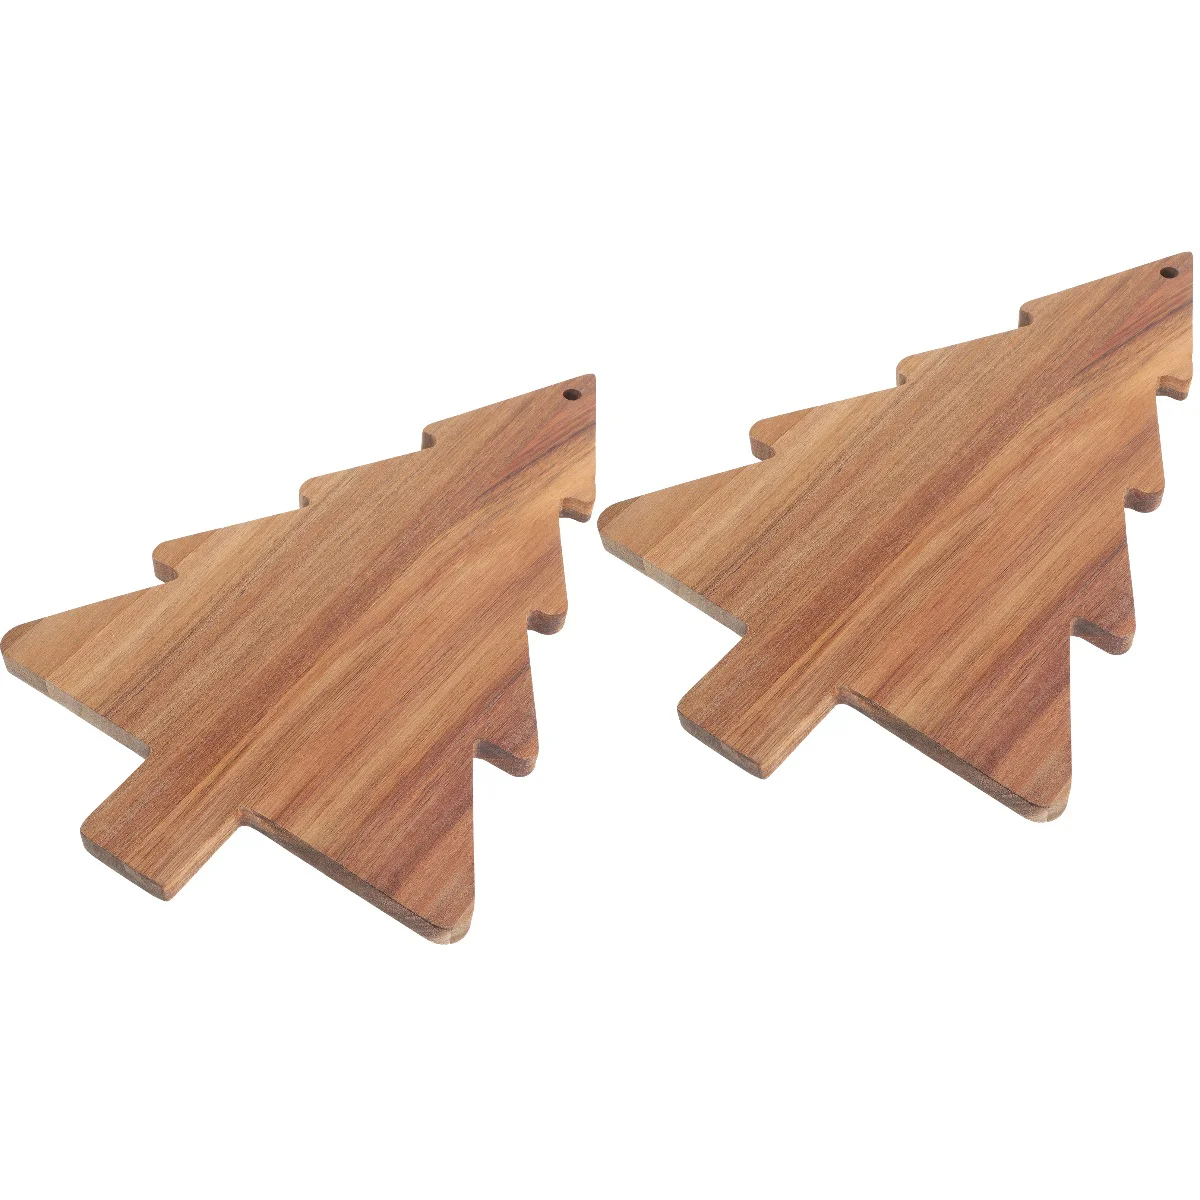 

Fruit Cutting Board Kitchen Pizza Storage Christmas Tree Charcuterie Boards Butter Dessert Plate Serving Food Tray